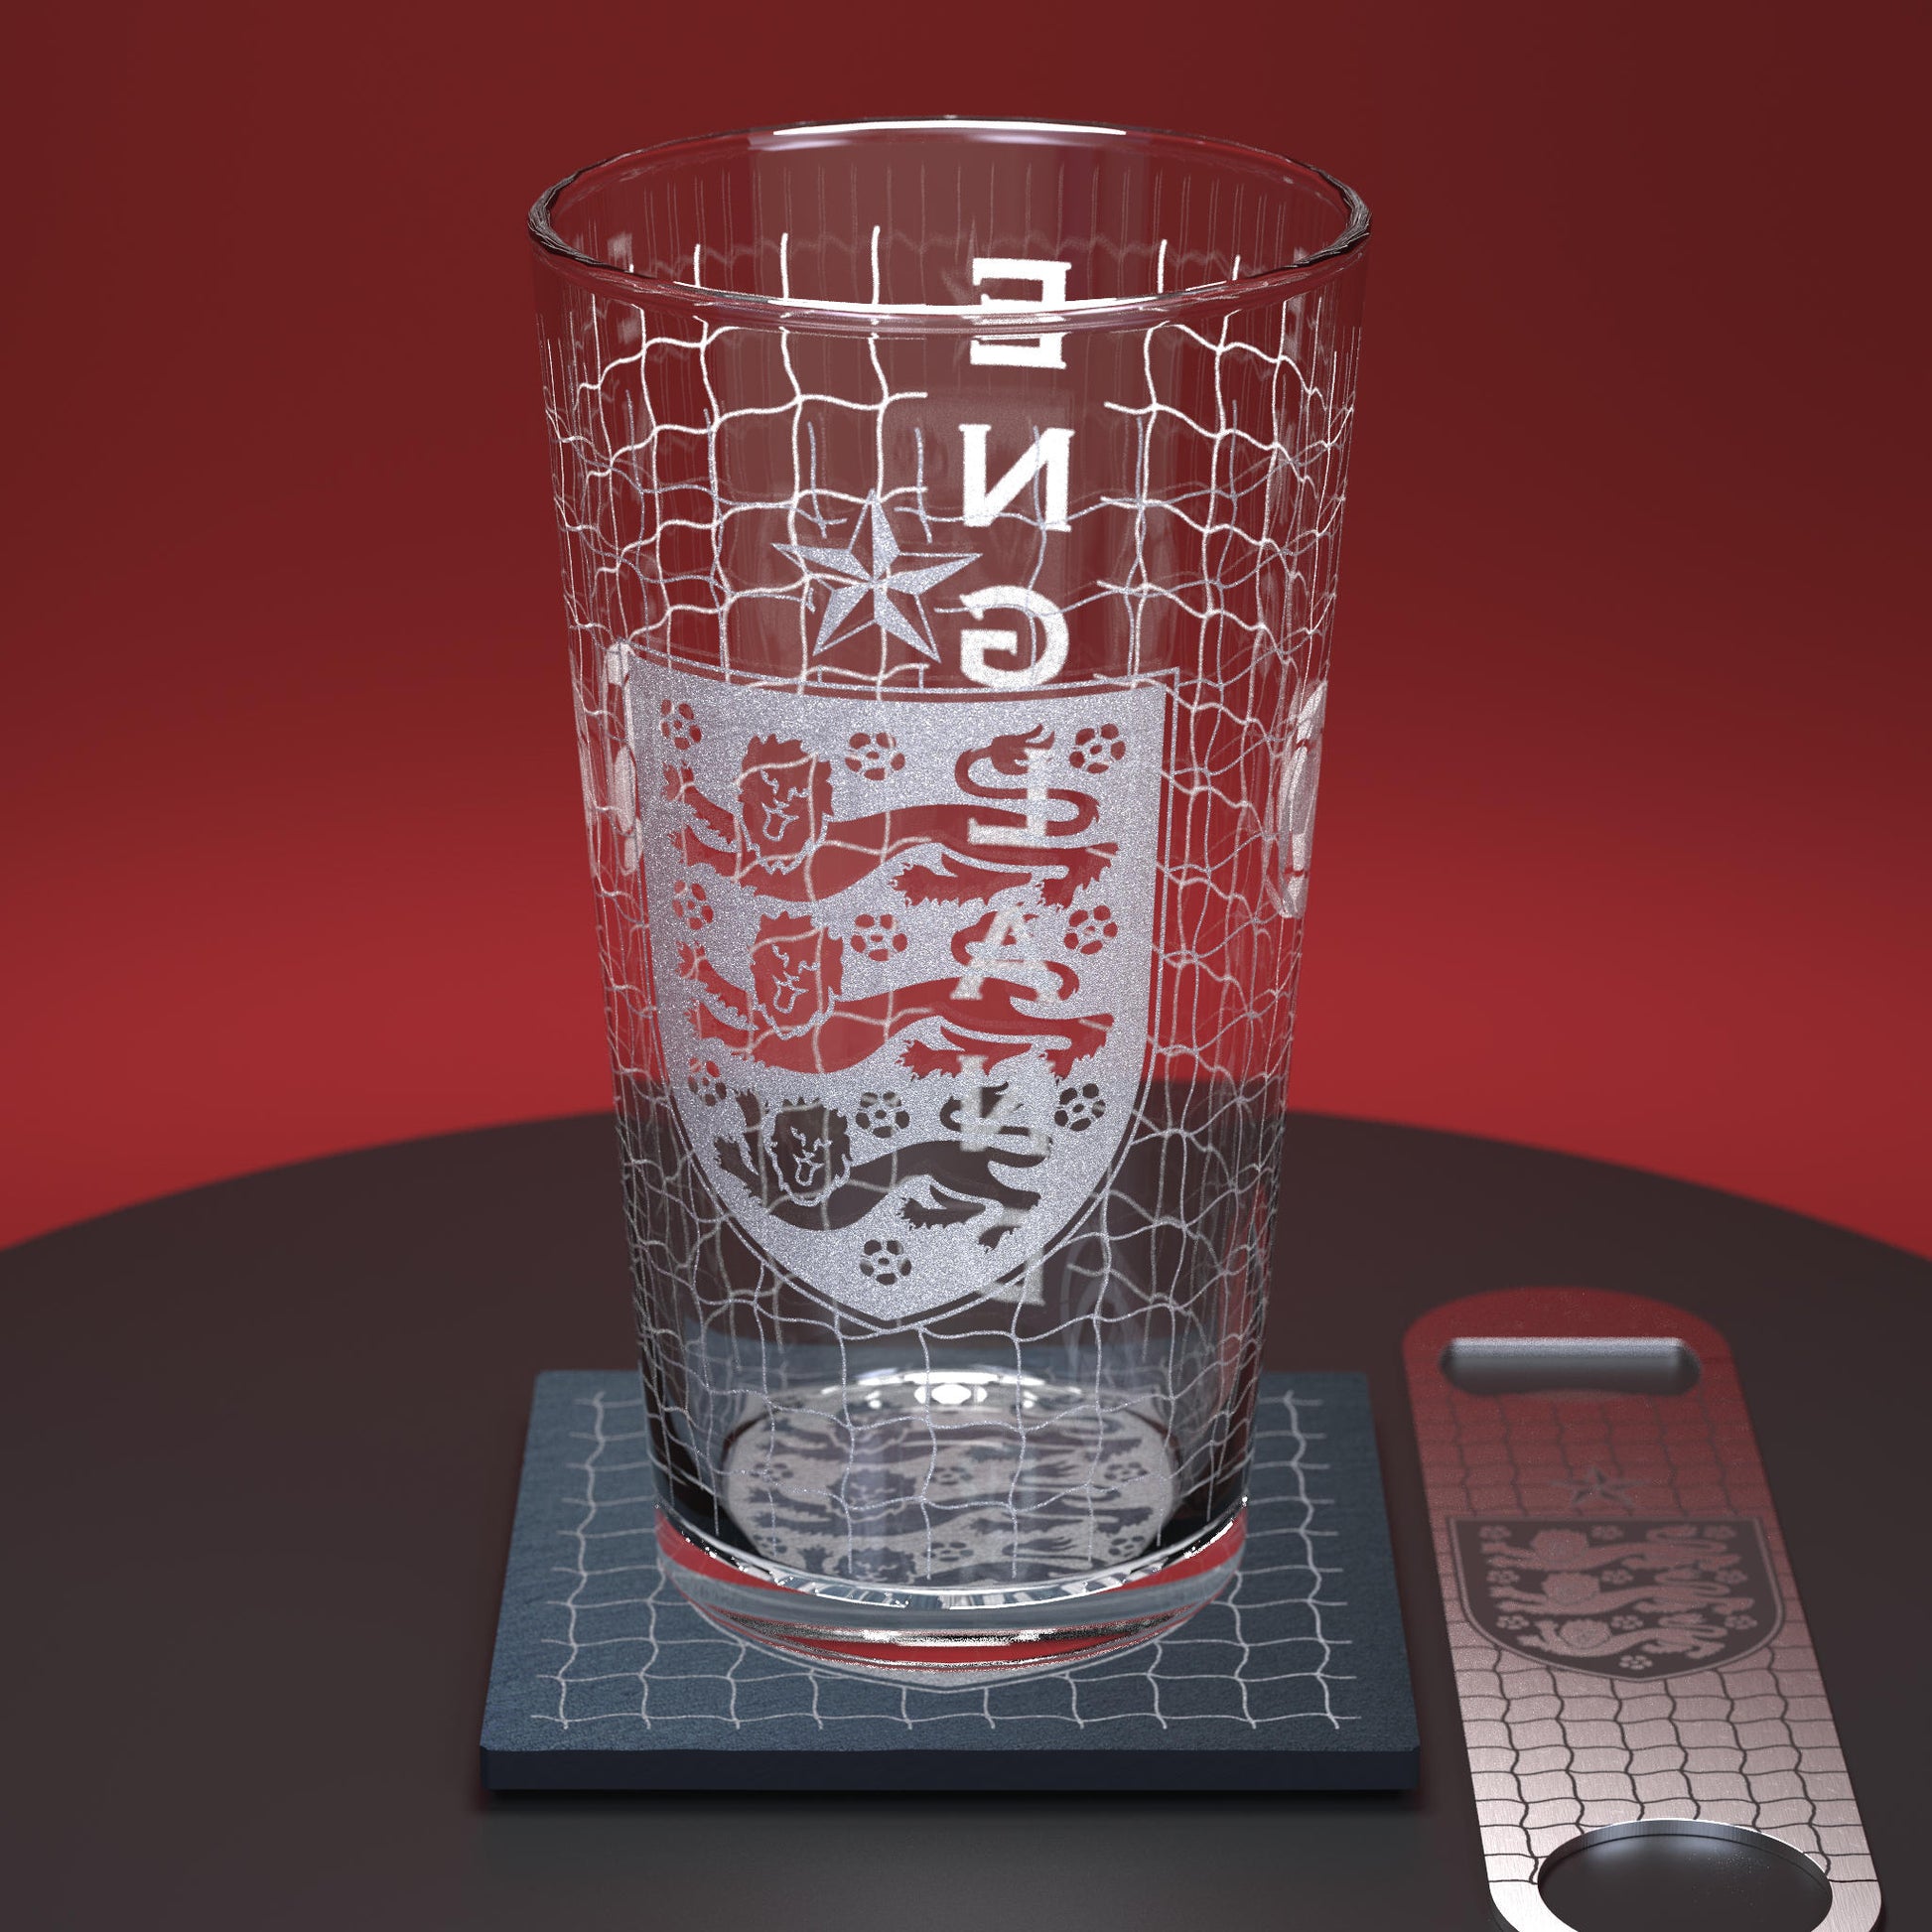 Pint glass set including a glass, slate coaster and stainless steel bottle opener, all engraved with the England football logo and net design